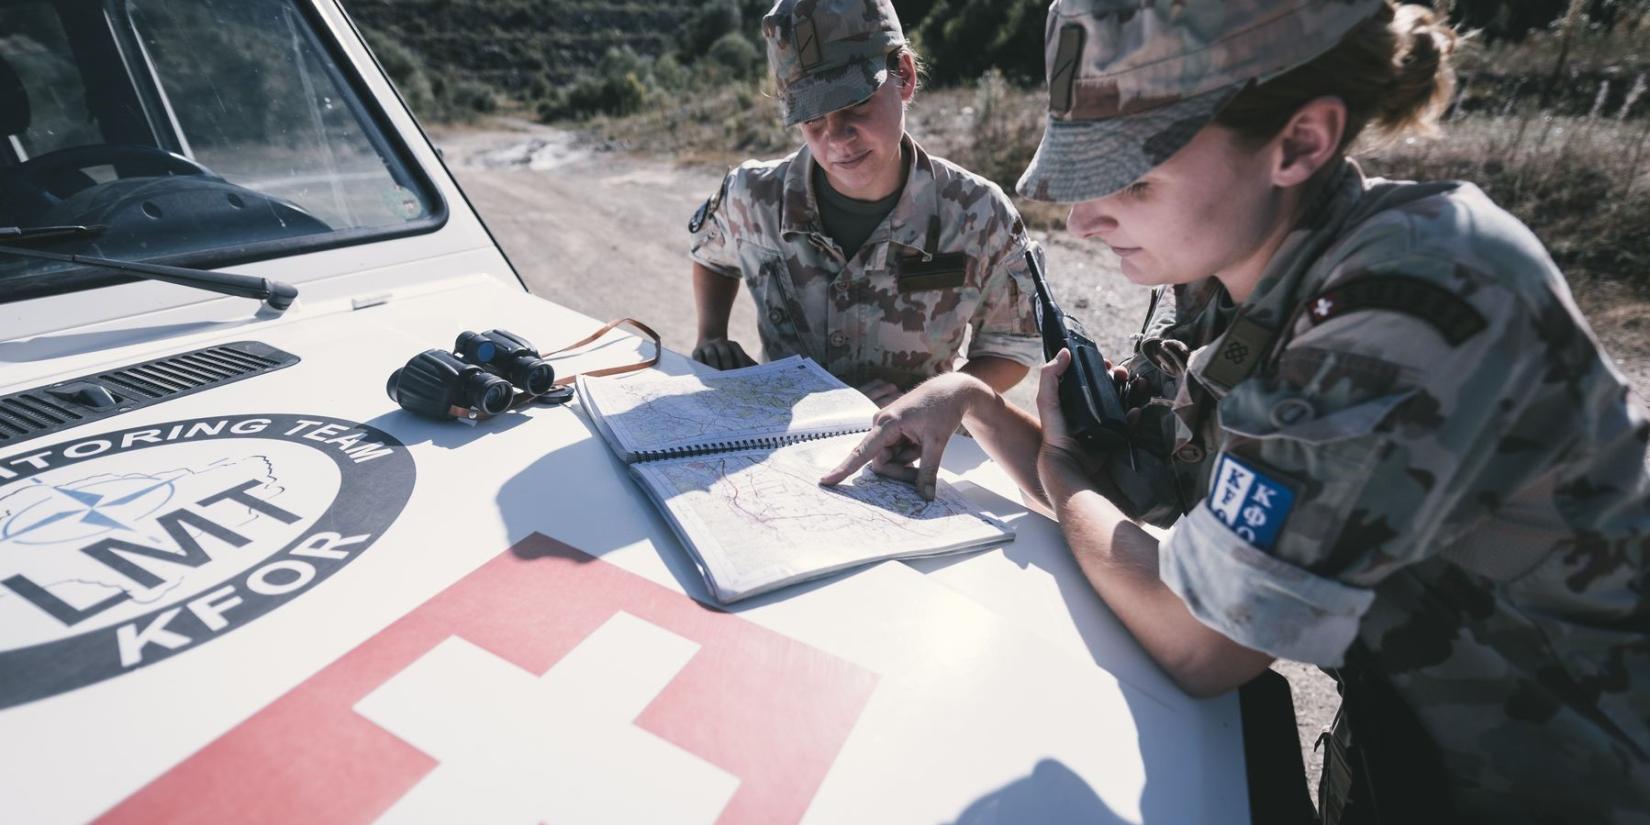 The Swiss Armed Forces have been participating in the Kosovo Force (KFOR) with SWISSCOY since 1999 and deployed so-called Liaison and Monitoring Teams (LMT) since 2010. These observation teams serve KFOR as an early warning system for potential changes in the situation. Copyright: DDPS